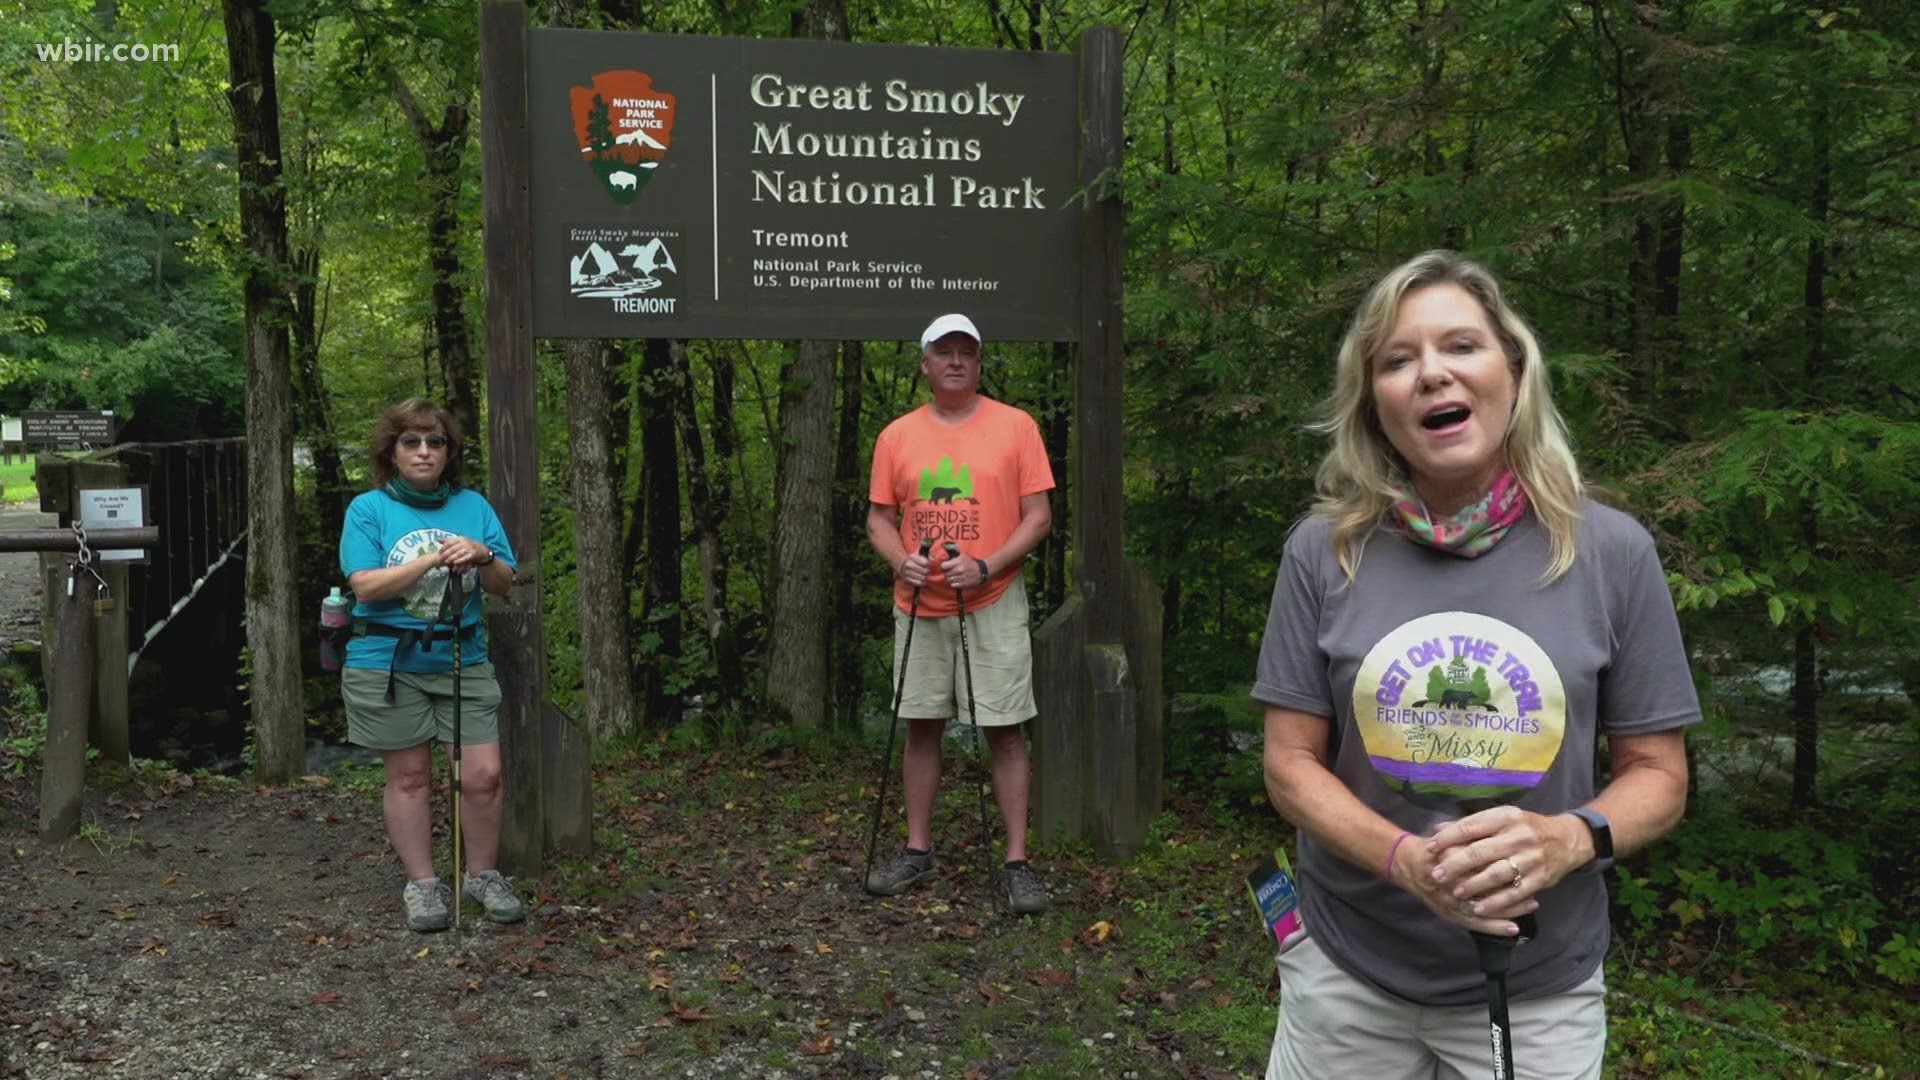 For more on Missy Kane's Get on Trails virtual hikes visit friendsandmissy.org. Call 865-329-8892  to enter a drawing for 8 free hikes. 9/21/2020-4pm.